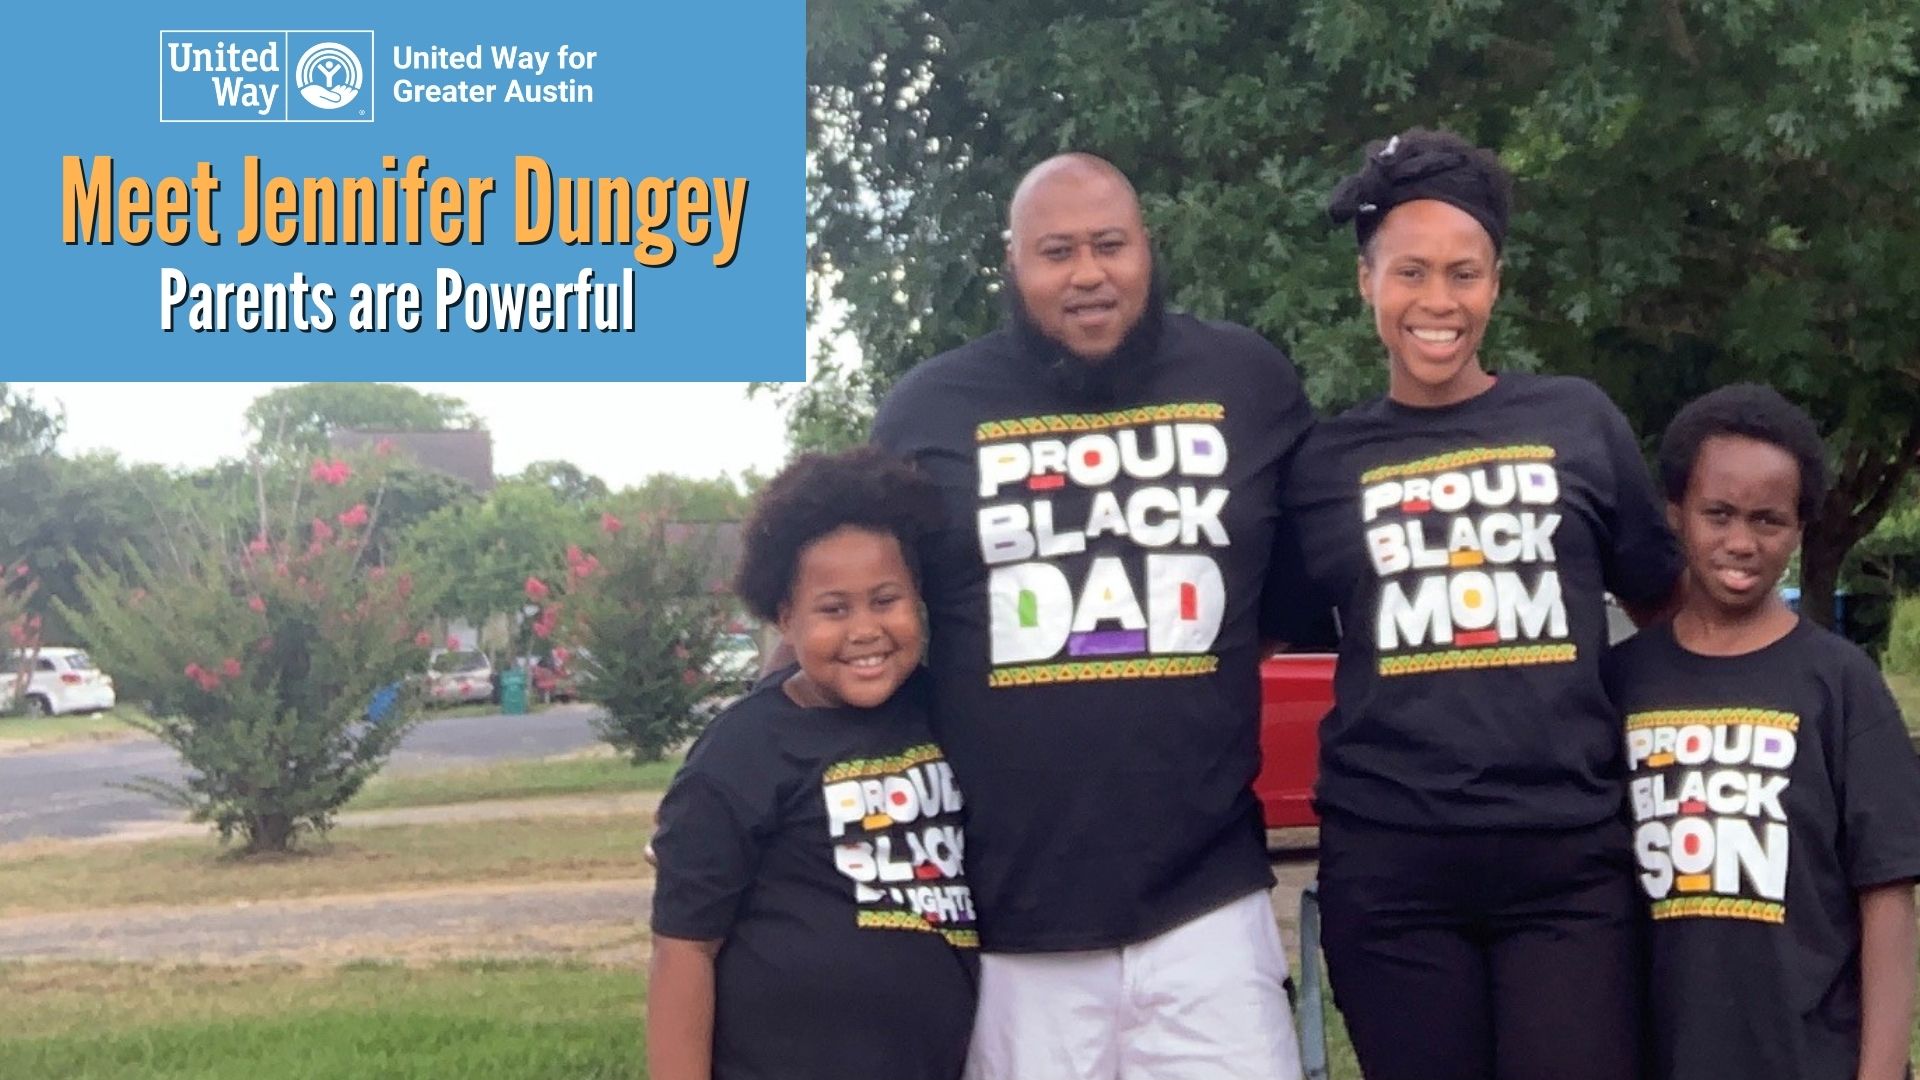 African-American family wearing black shirts